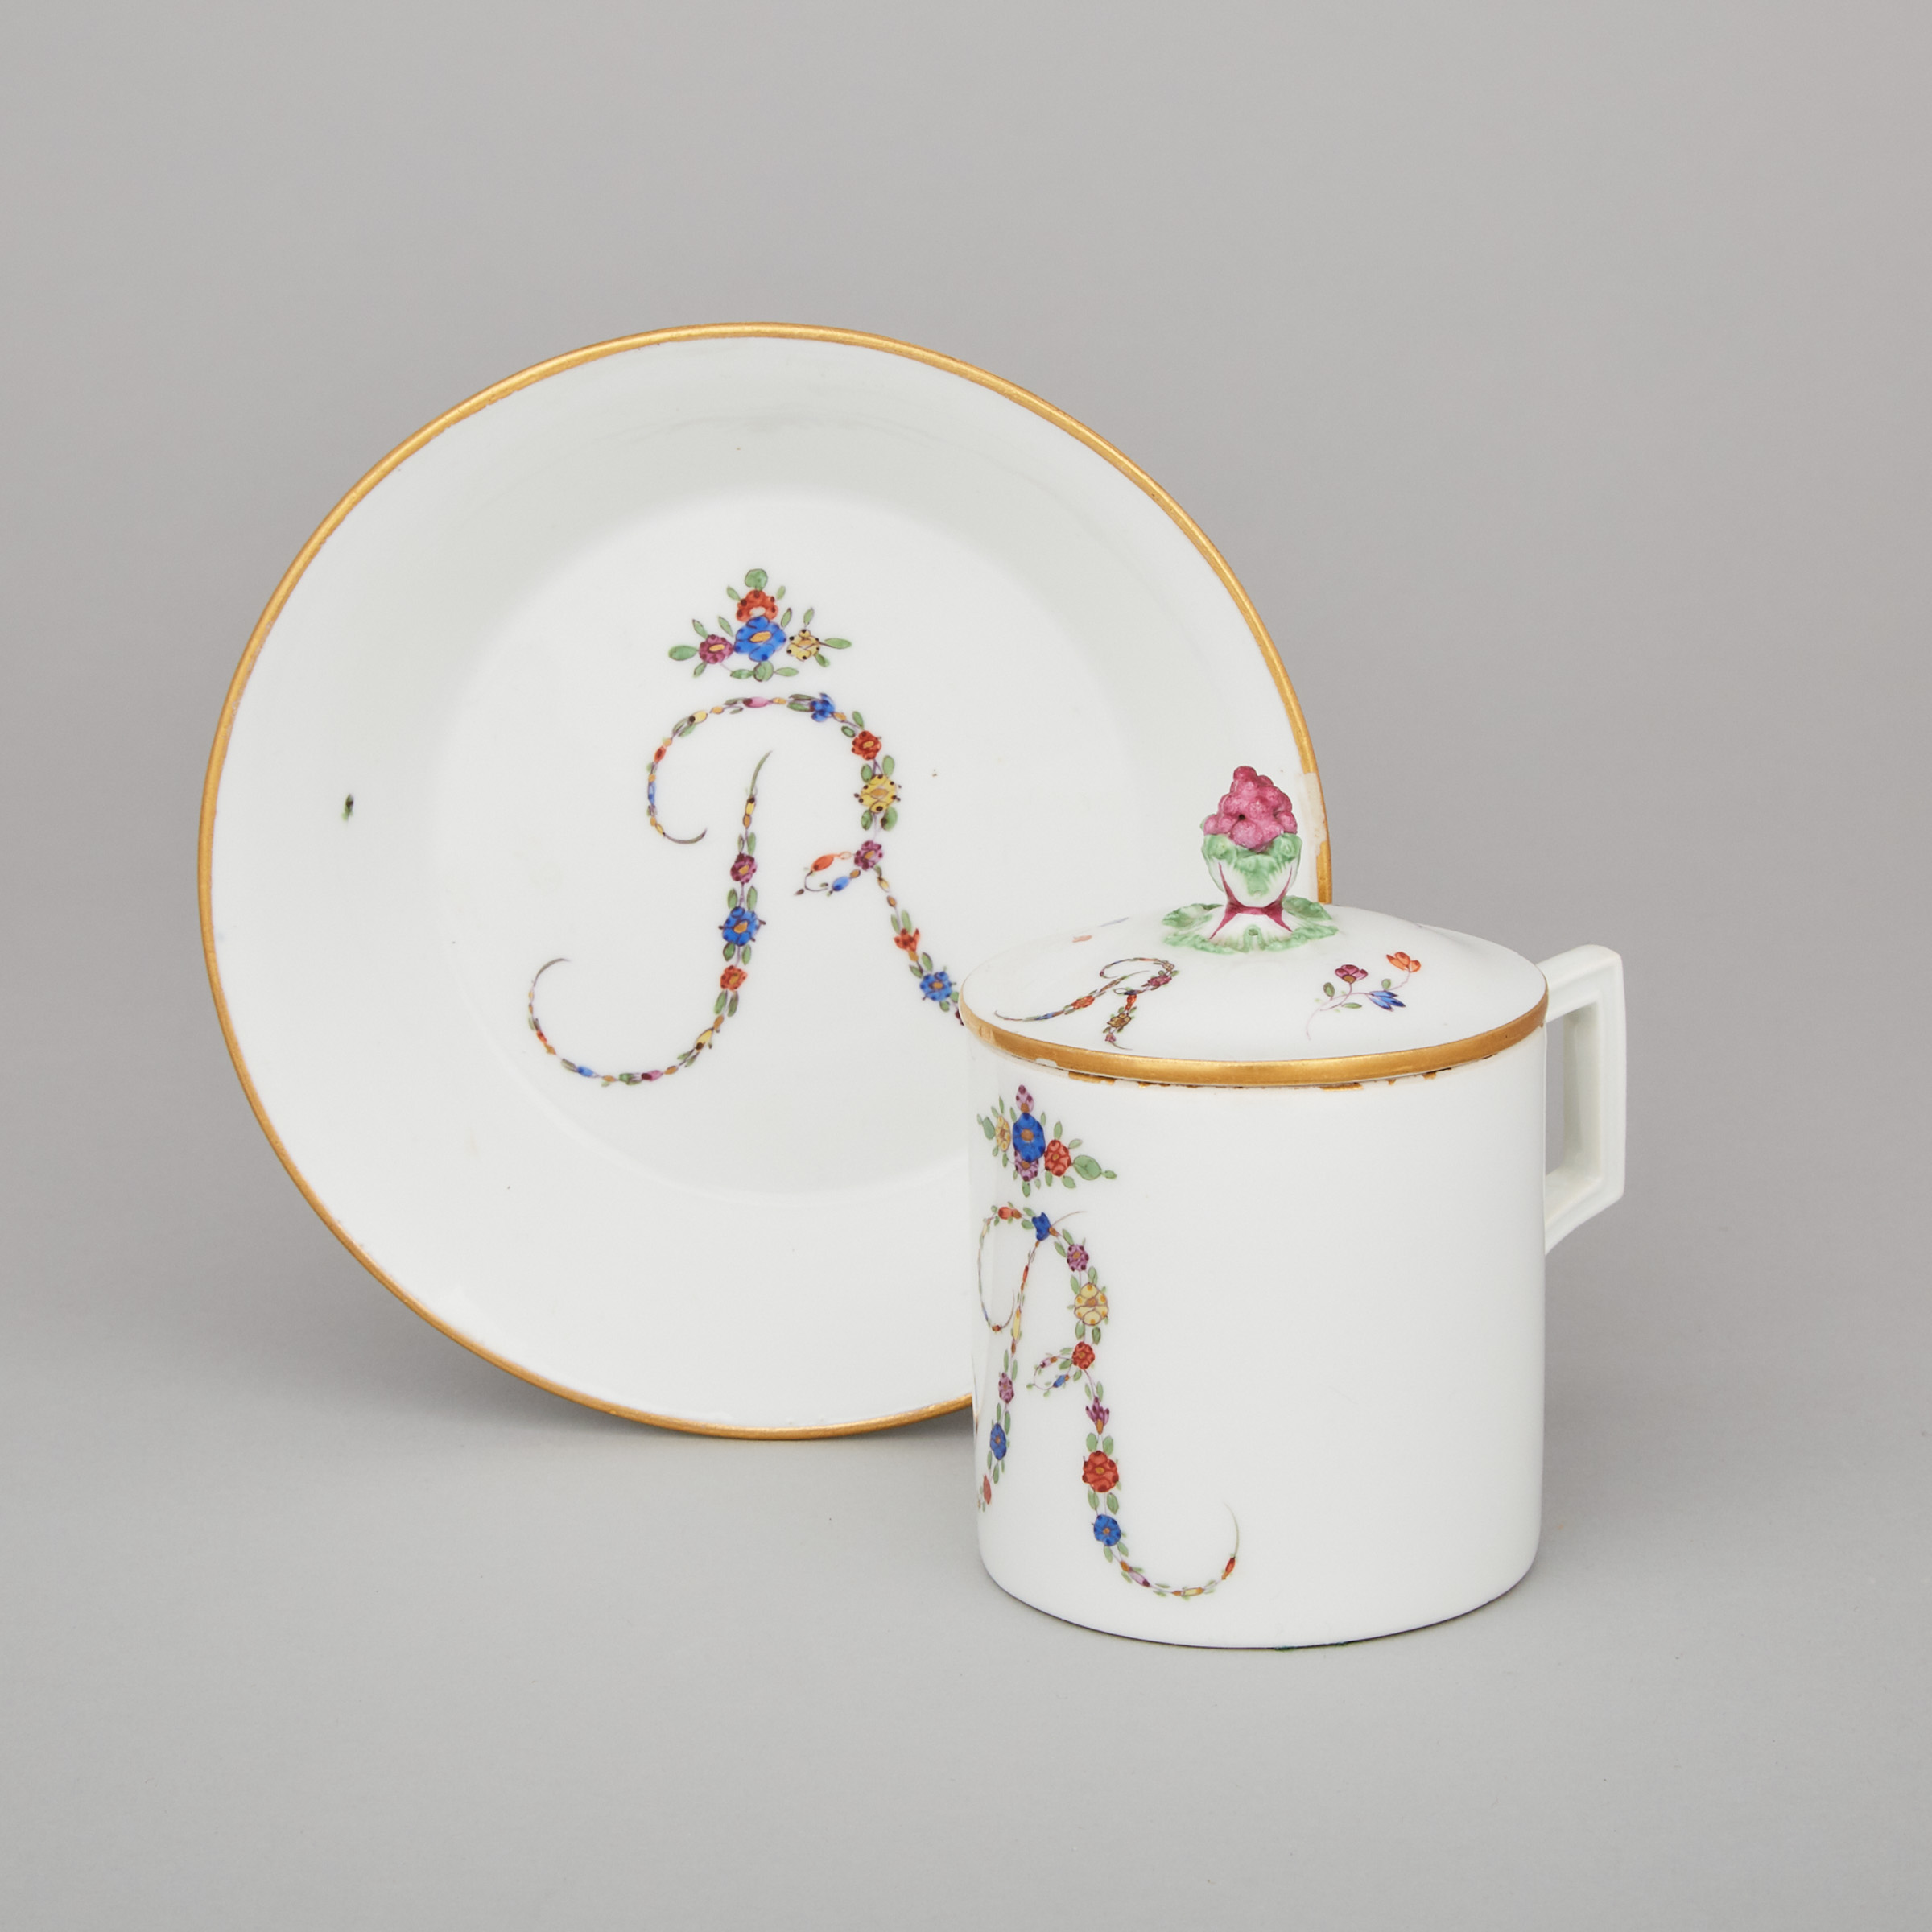 Meissen Covered Coffee Cup and Saucer, late 18th/early 19th century